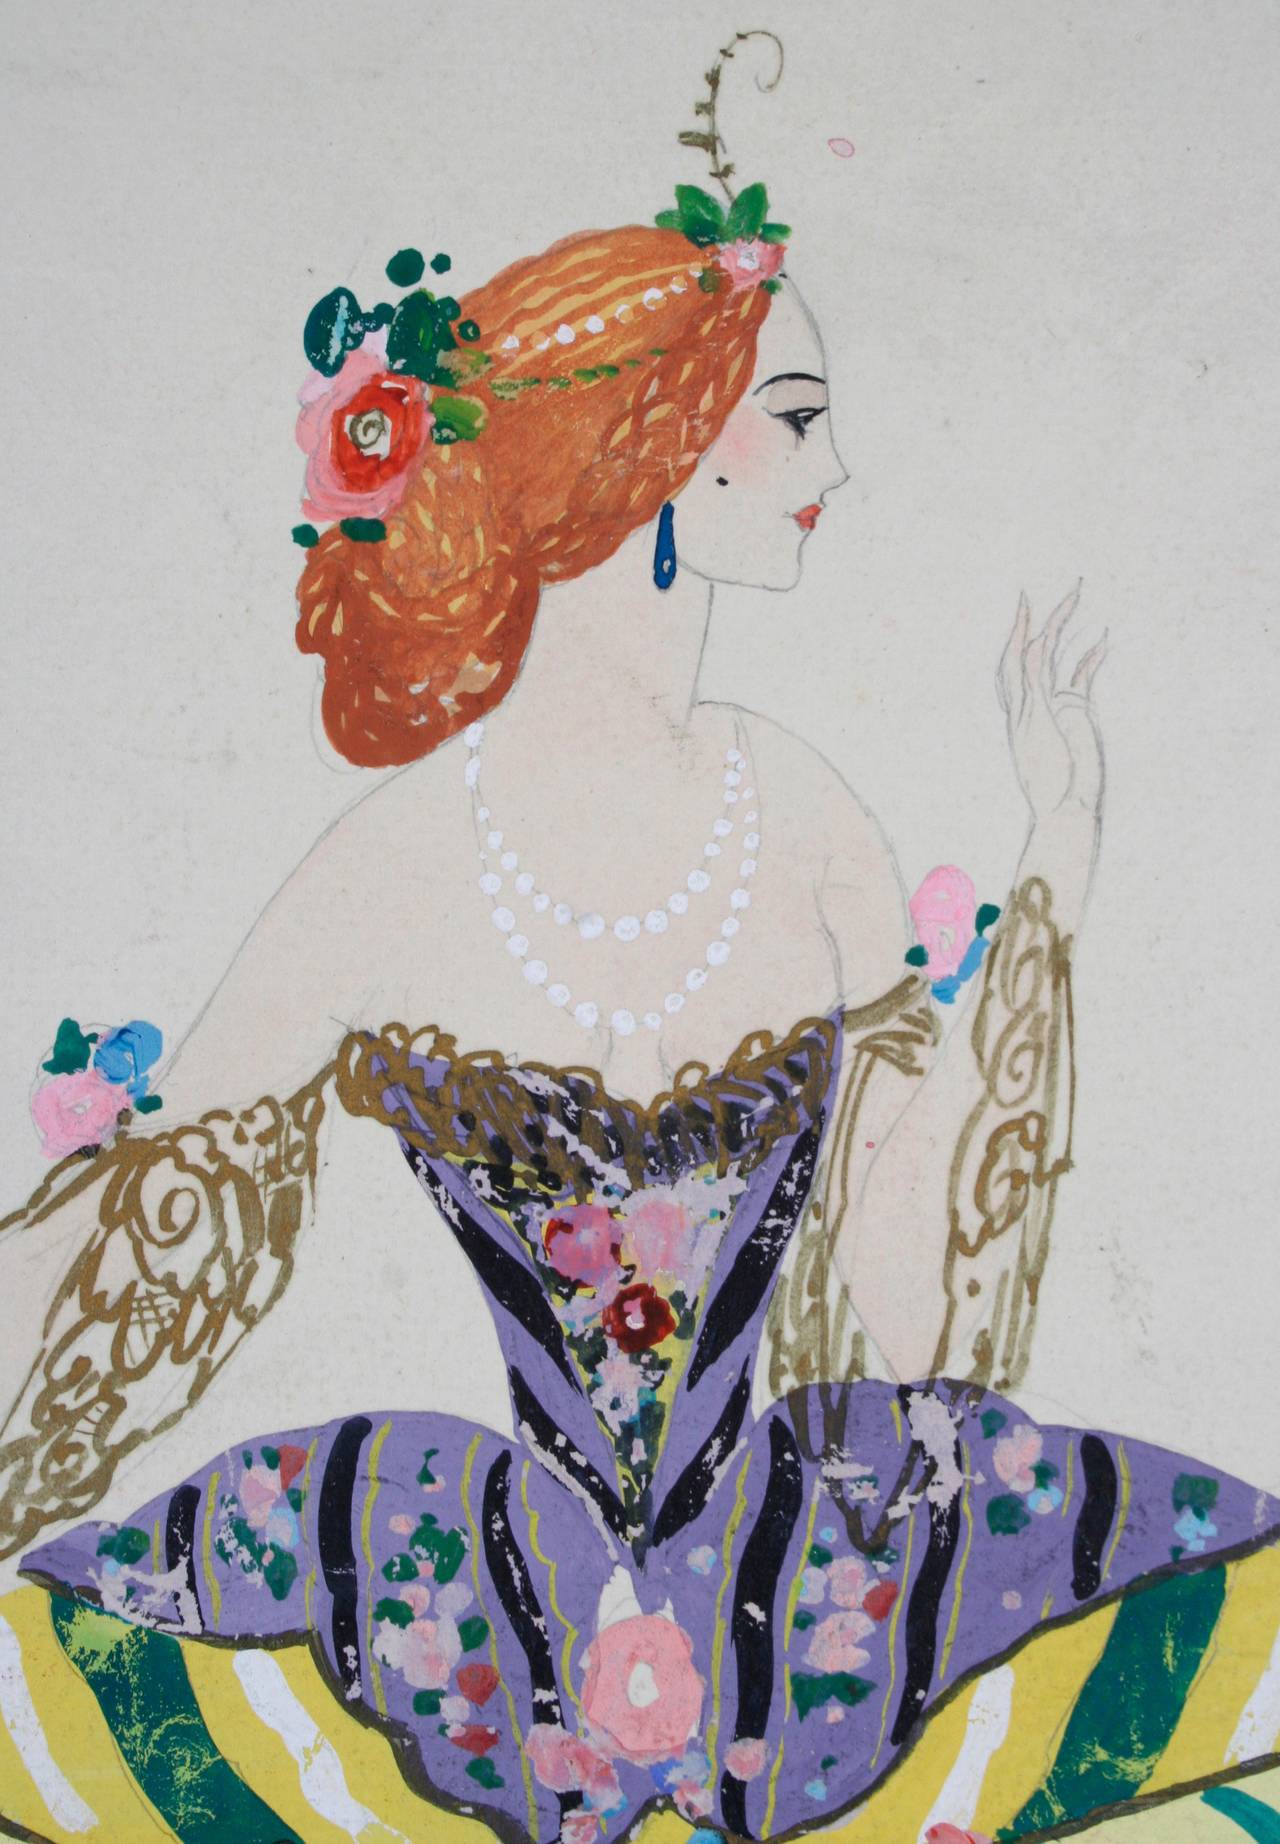 An Art Deco period watercolor and pencil on paper costume design by Umberto Brunelleschi, c. 1920s. Signed in pencil, lower right. 

Italian born Brunelleschi (1879-1949) was a painter, printmaker, illustrator and designer. He permanently